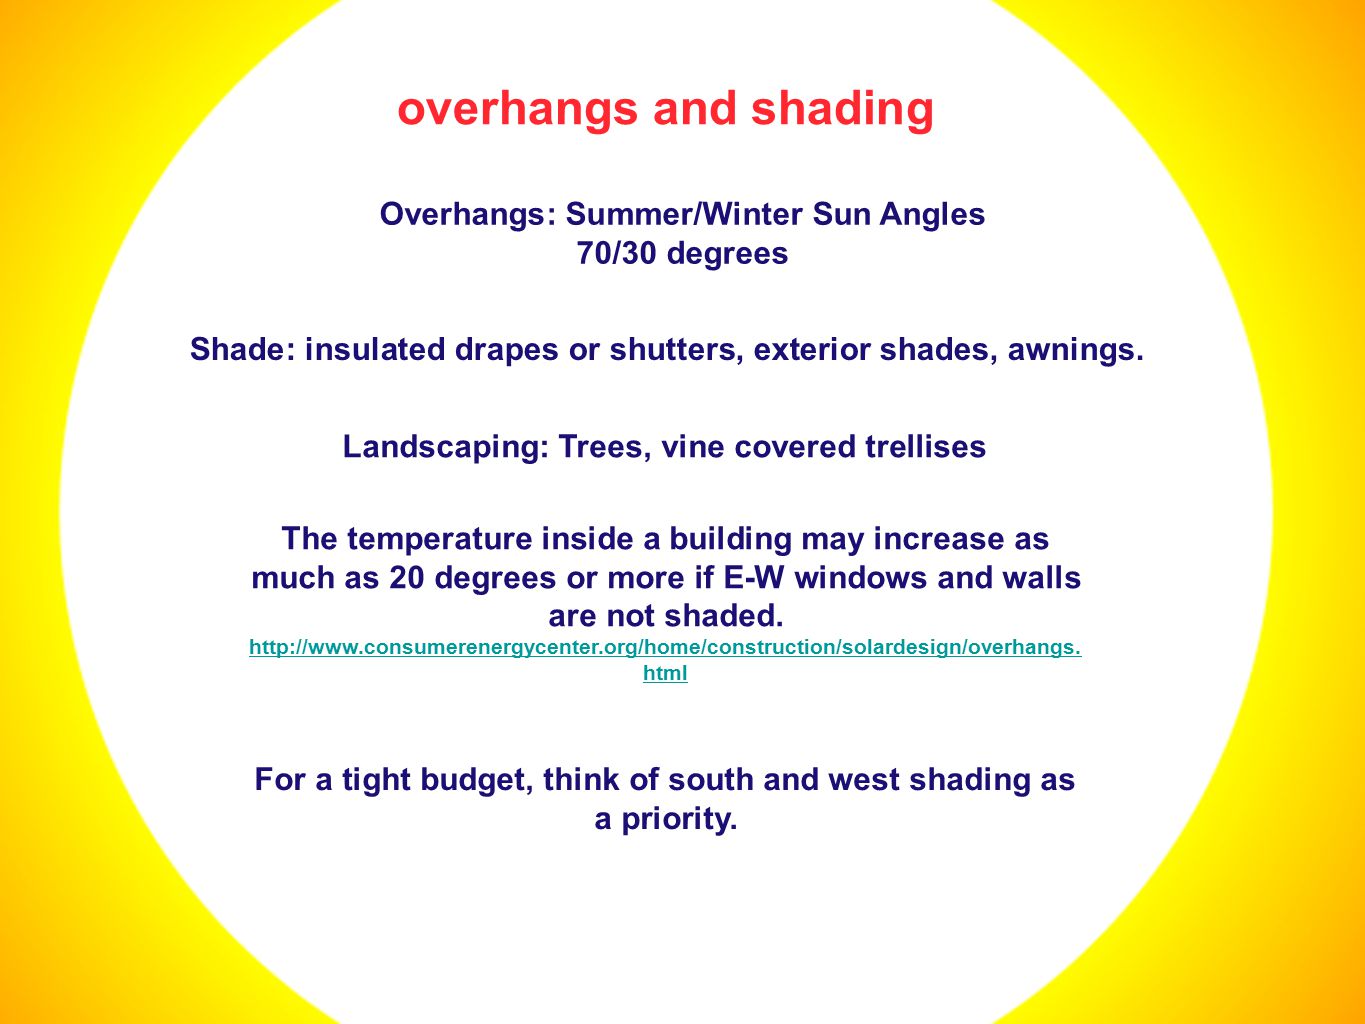 The temperature inside a building may increase as much as 20 degrees or more if E-W windows and walls are not shaded.